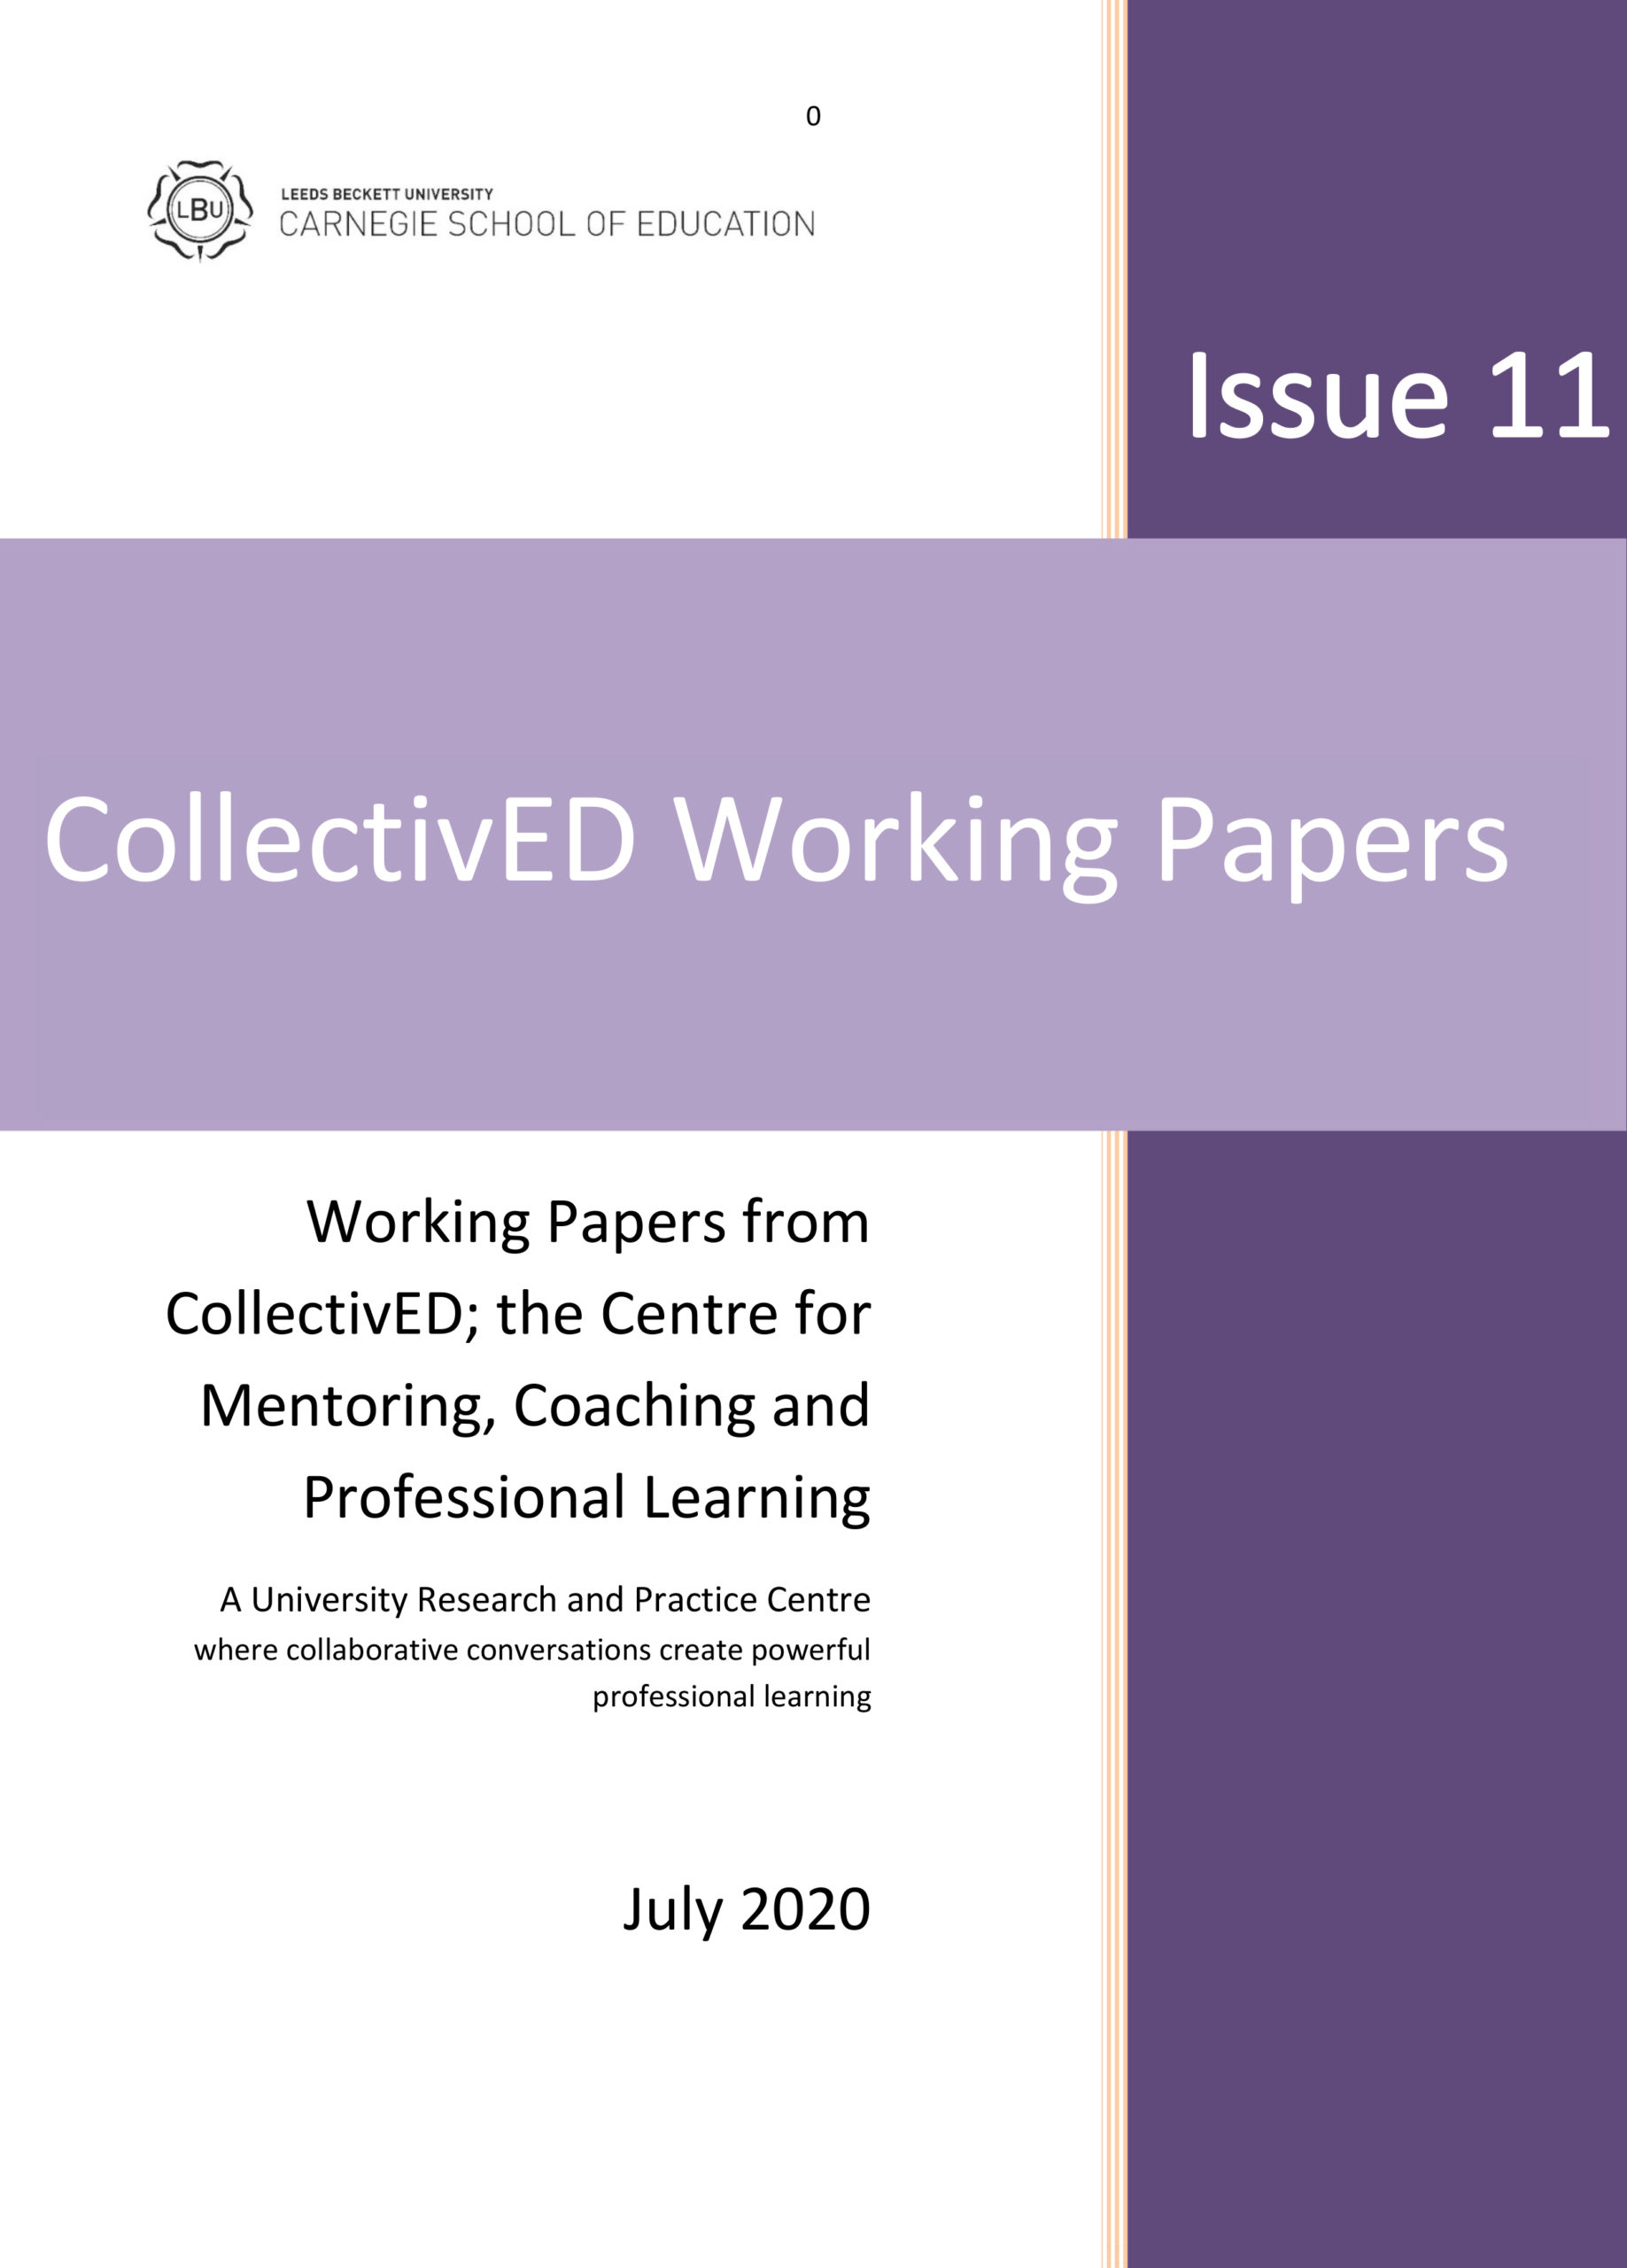 CollectivED Working Papers